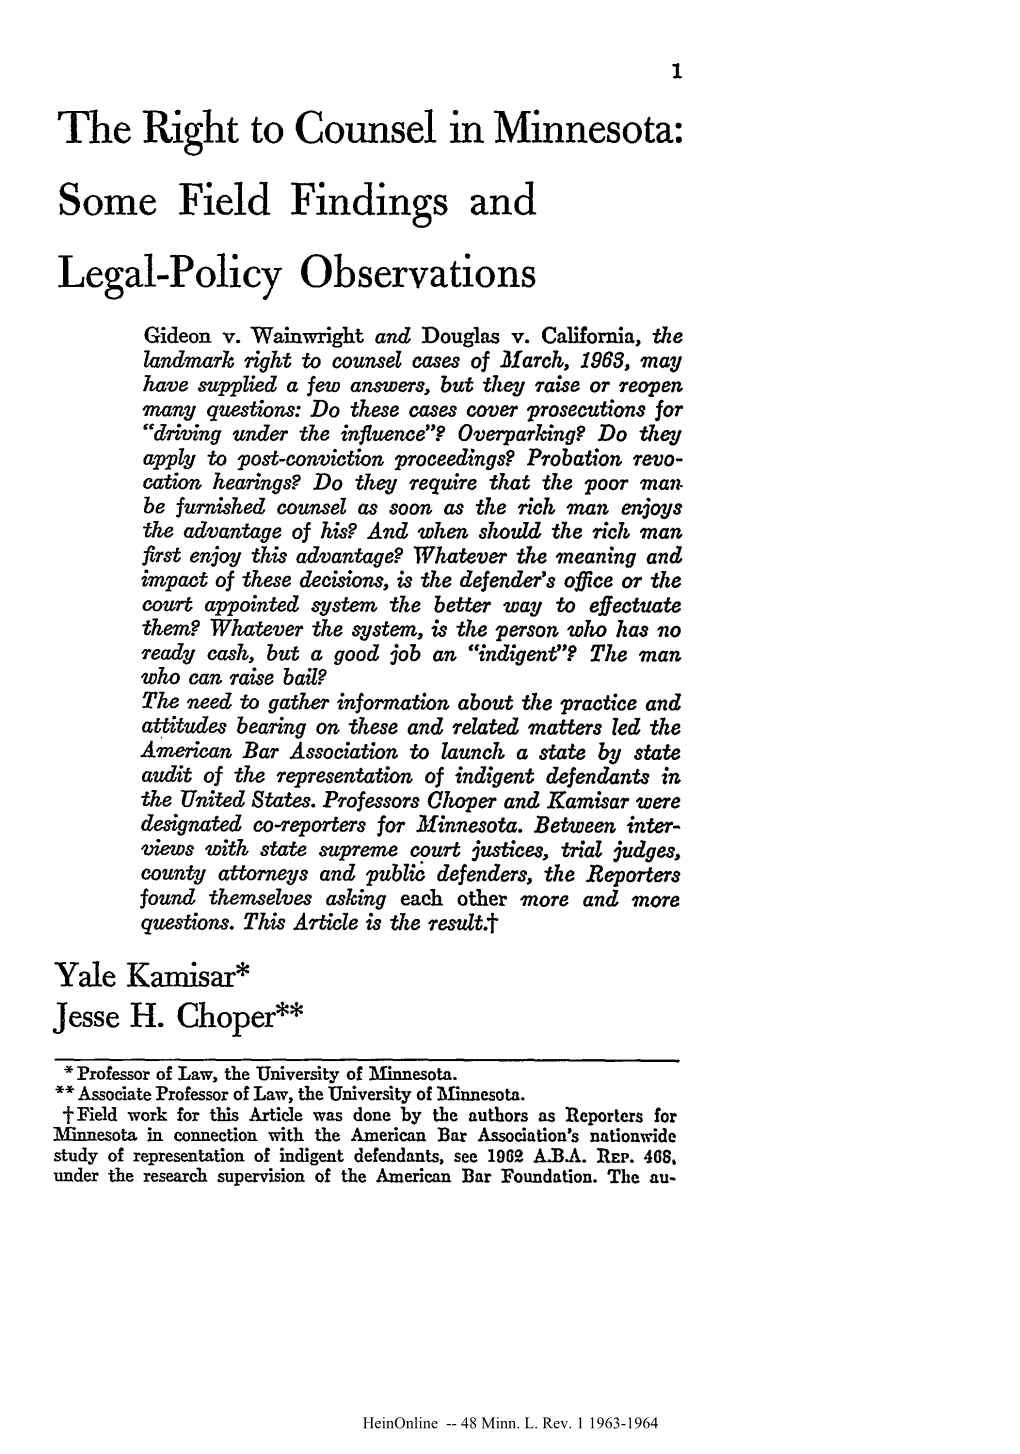 The Right to Counsel in Minnesota: Some Field Findings and Legal-Policy Observations